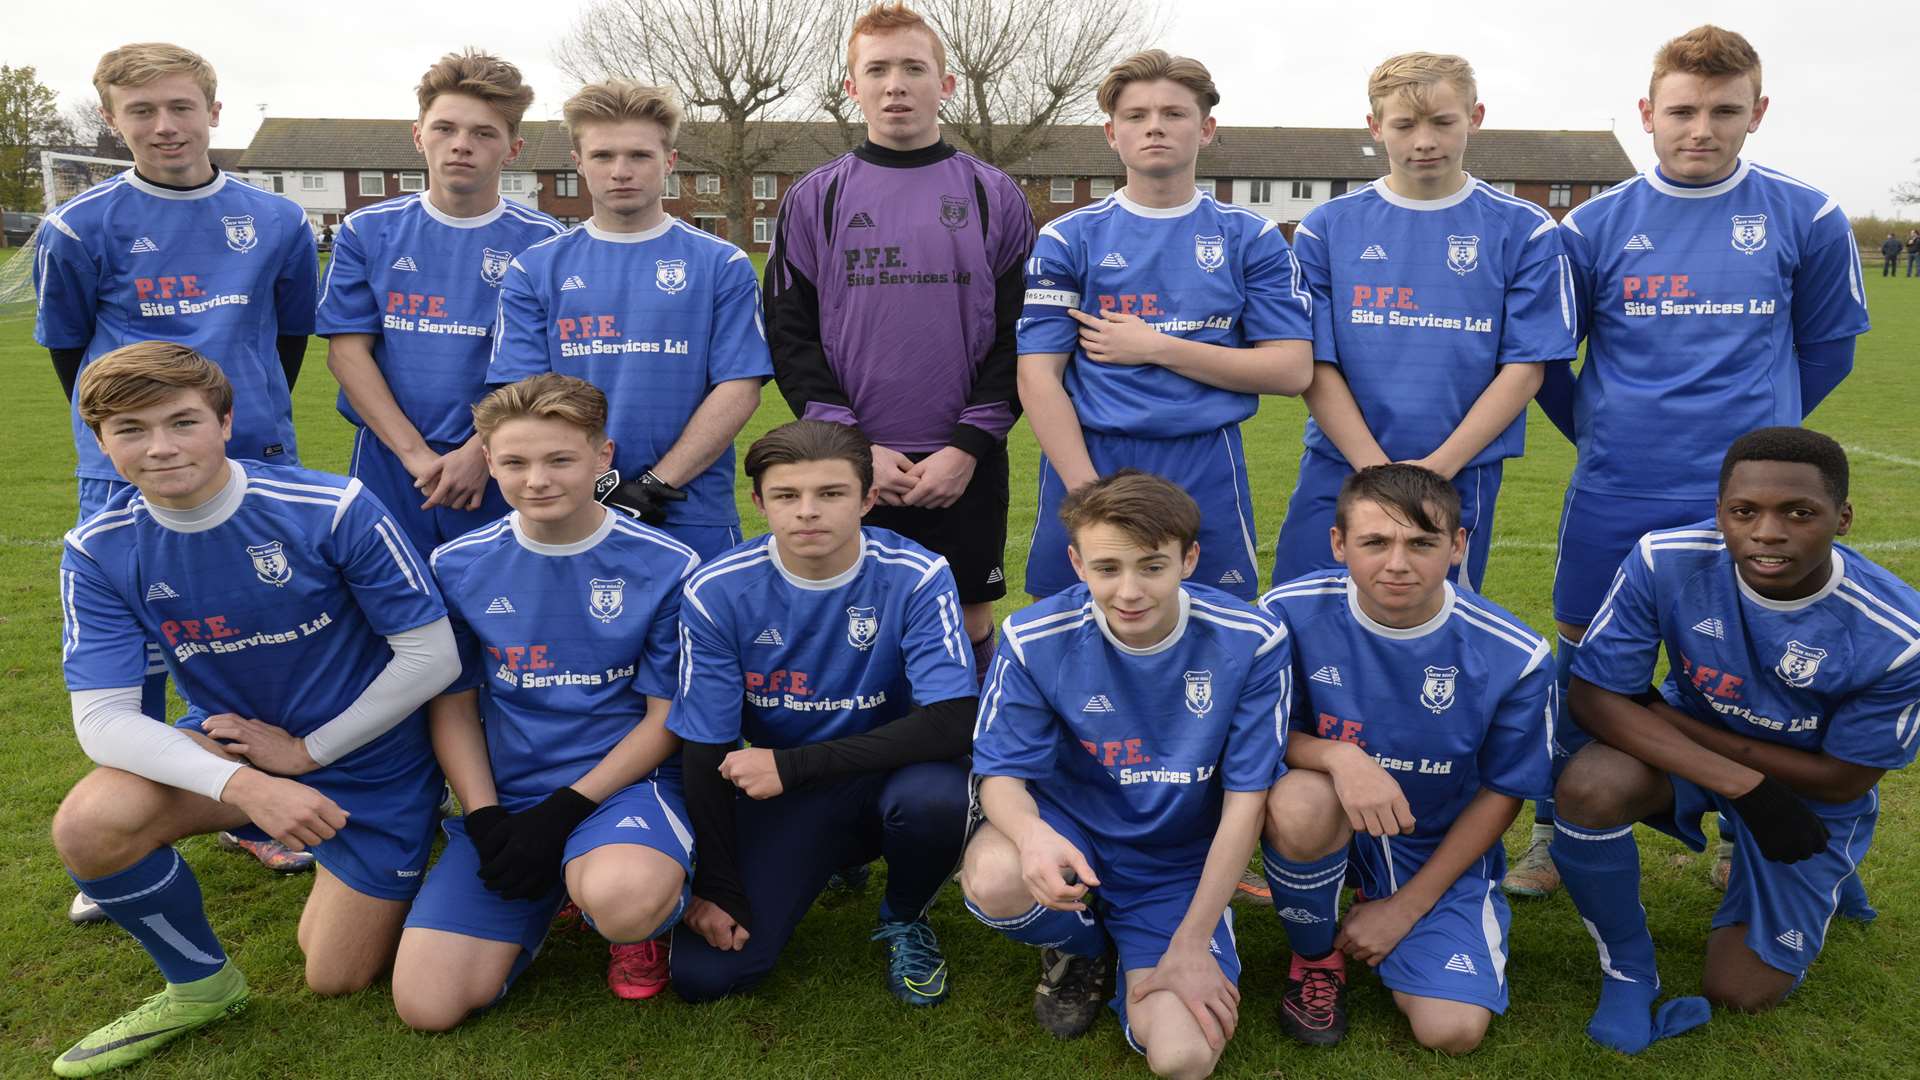 New Road under-18s were 8-0 winners over Omega 92 Spartans in Division 2 Picture: Chris Davey